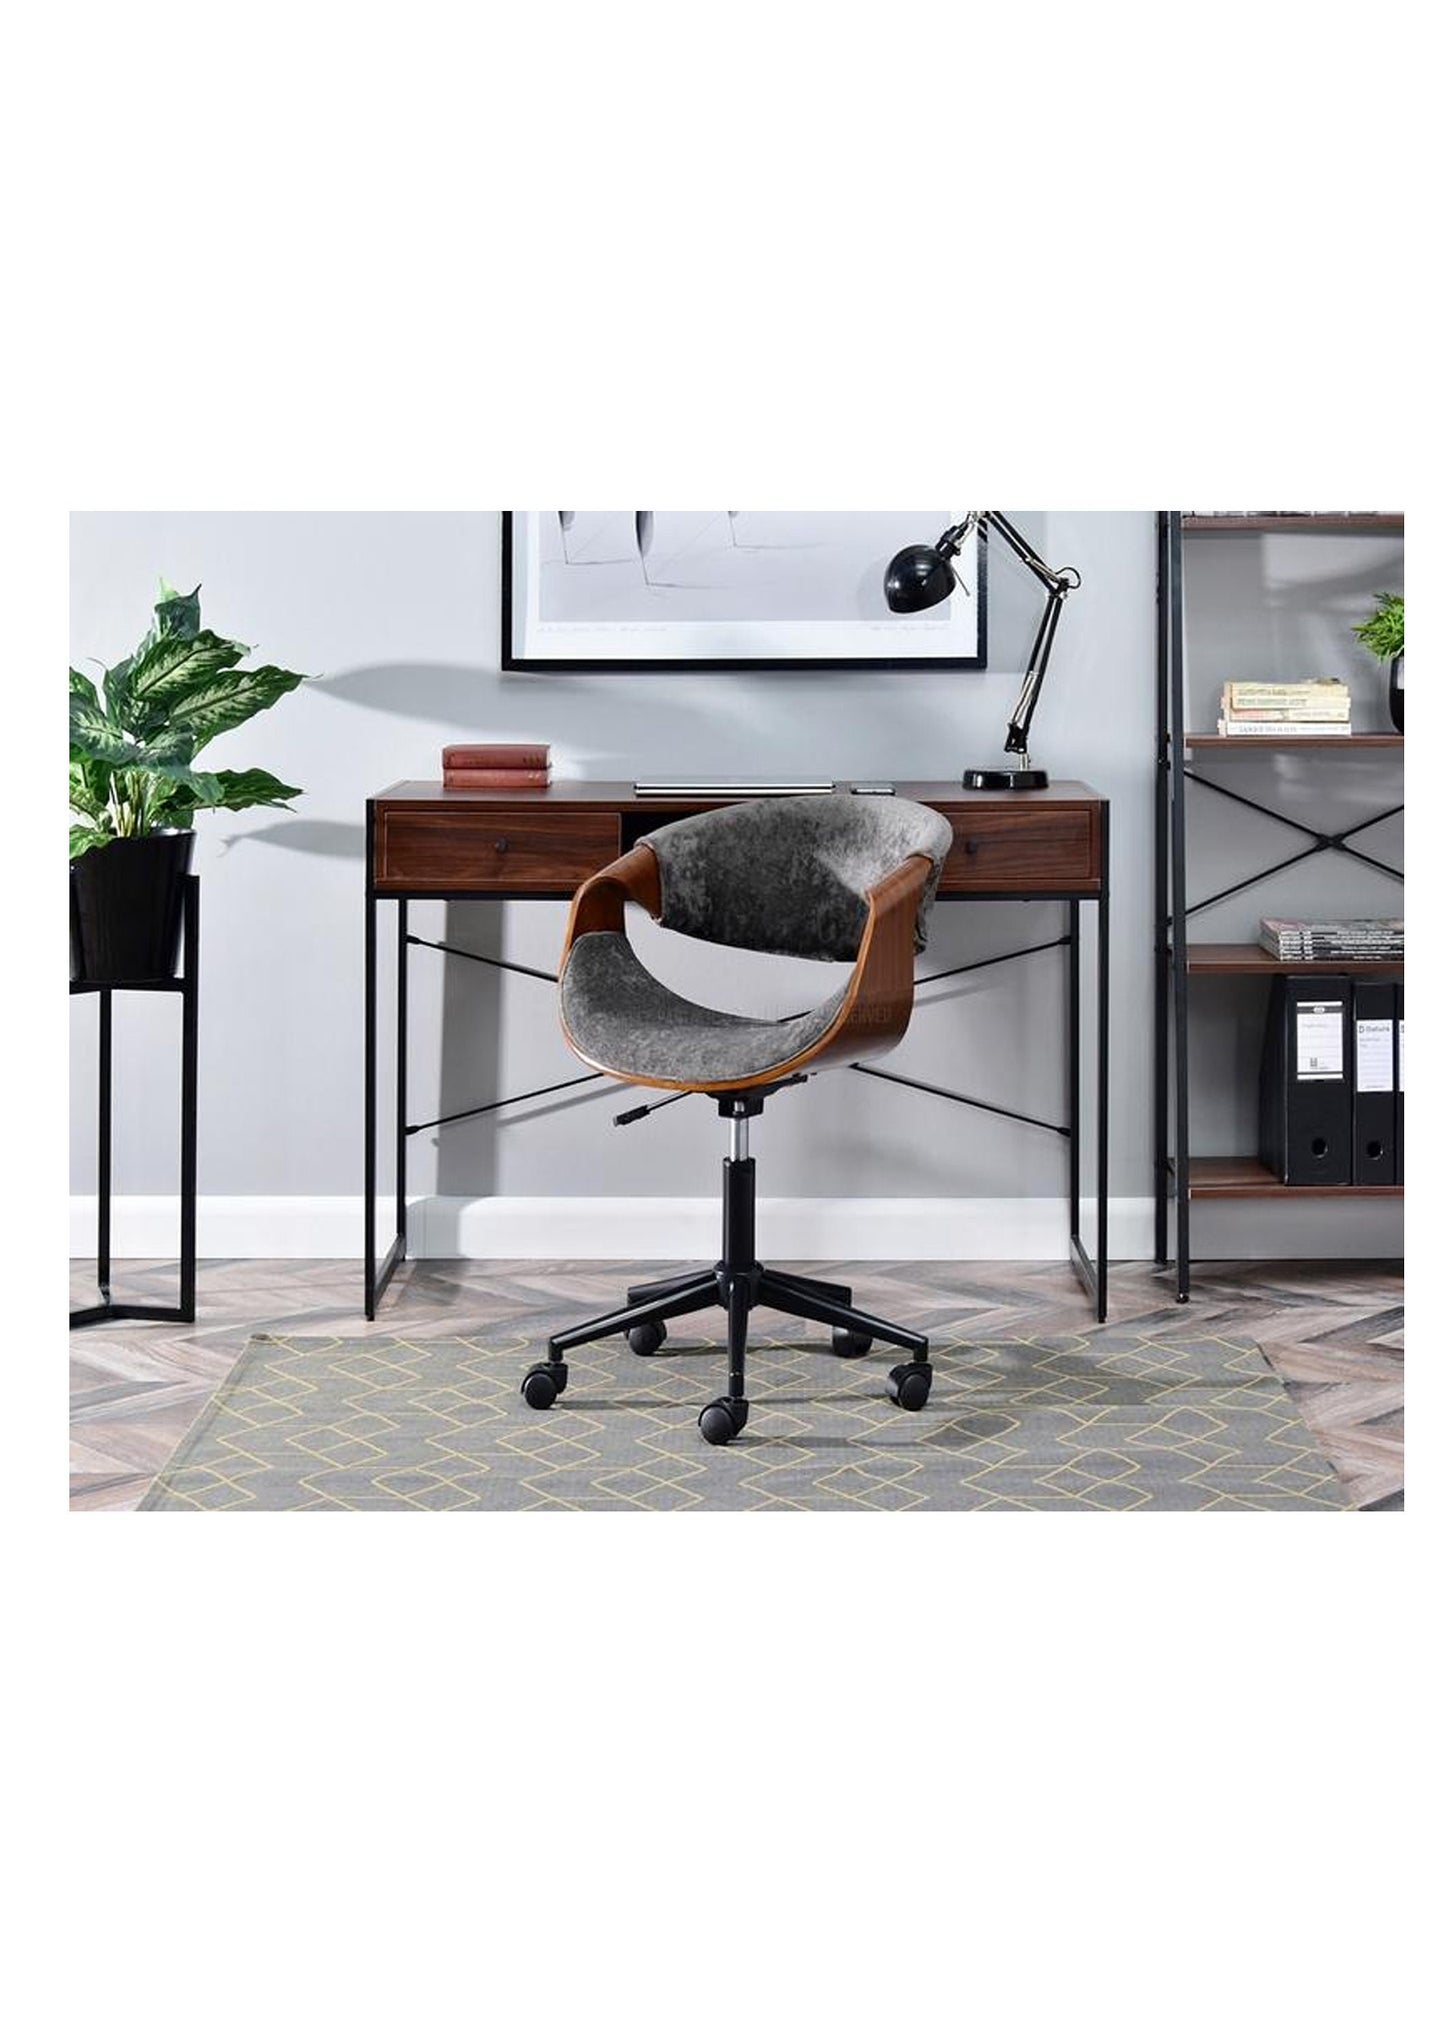 NEW RETRO Style Adjustable Swivel office desk chair grey velour and wood